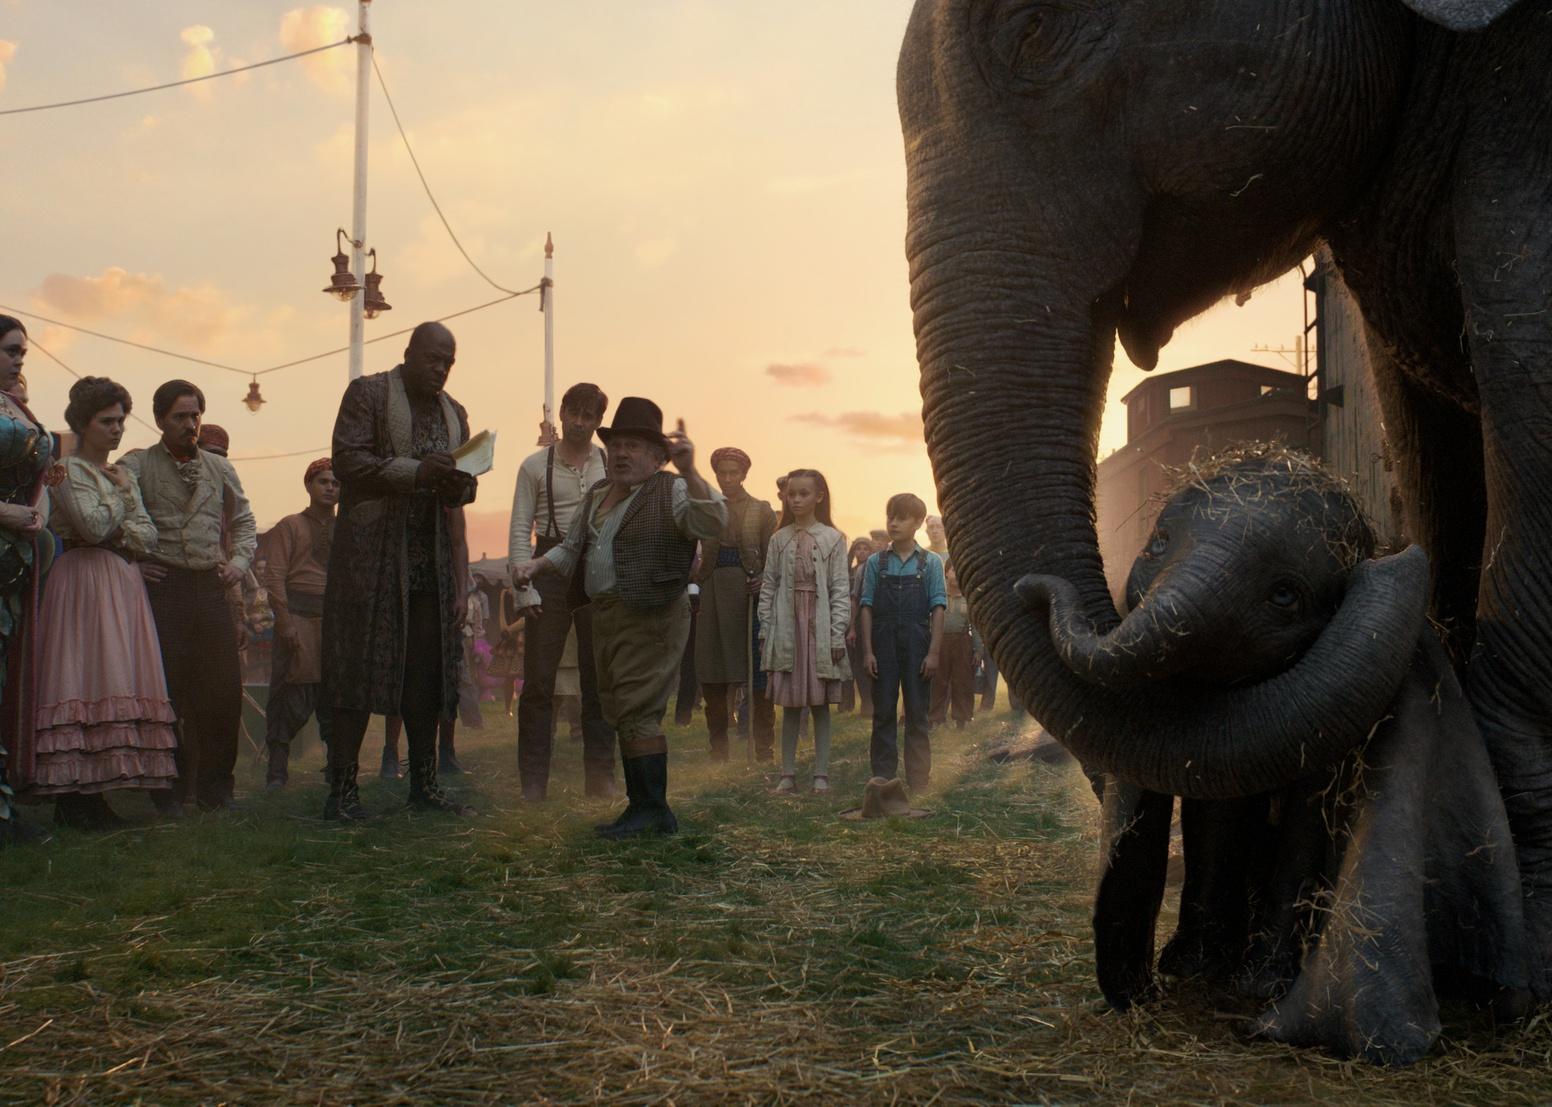 Danny DeVito and Colin Farrell talking to a crowd of people outside a circus tent next to a baby and mother elephant.